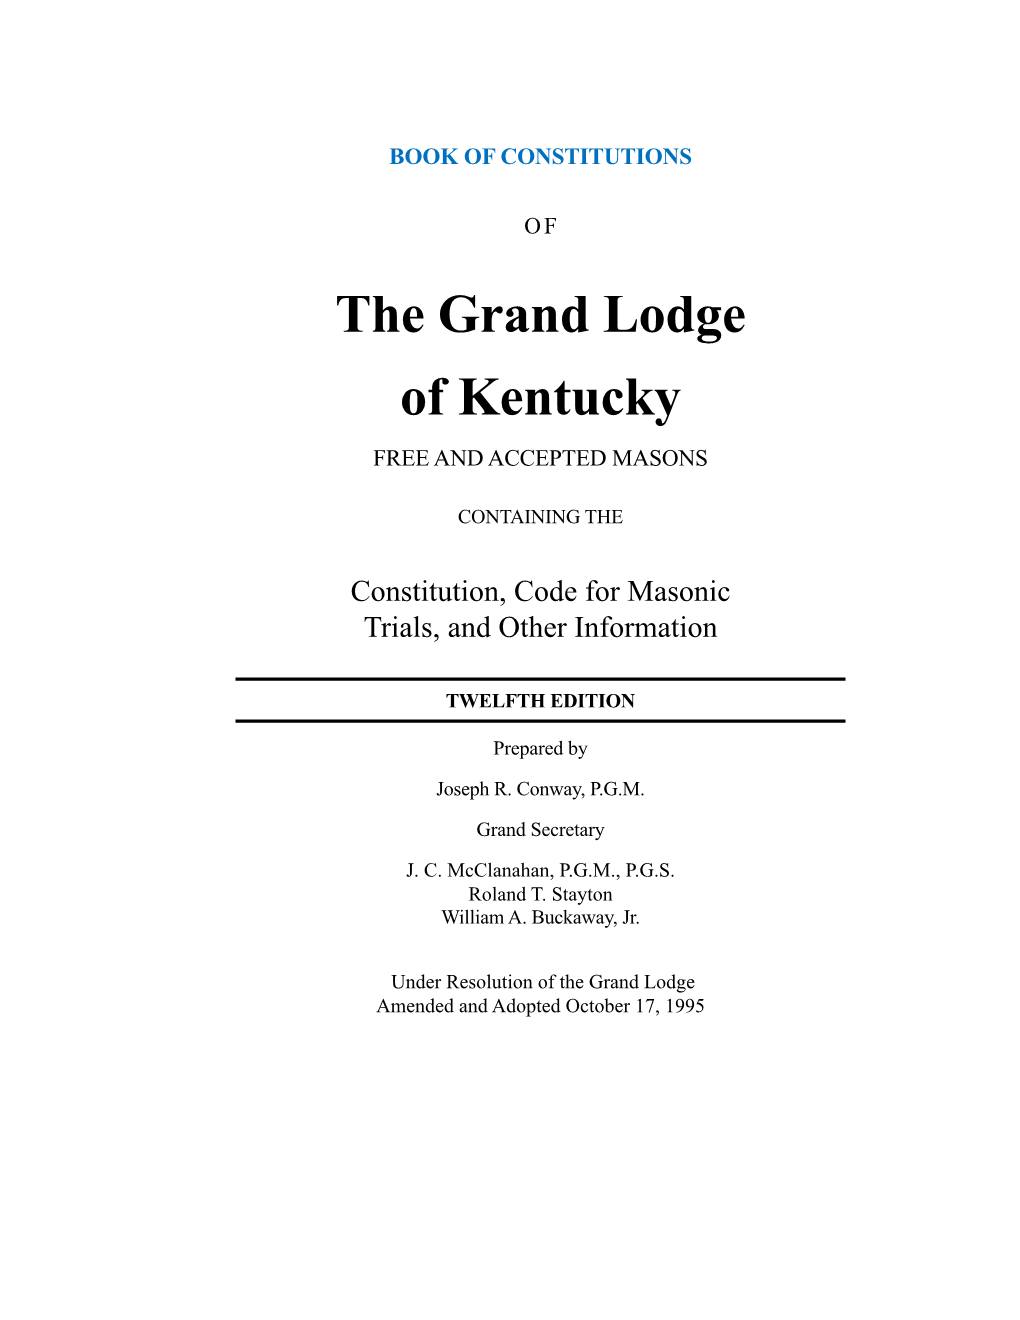 The Grand Lodge of Kentucky FREE and ACCEPTED MASONS